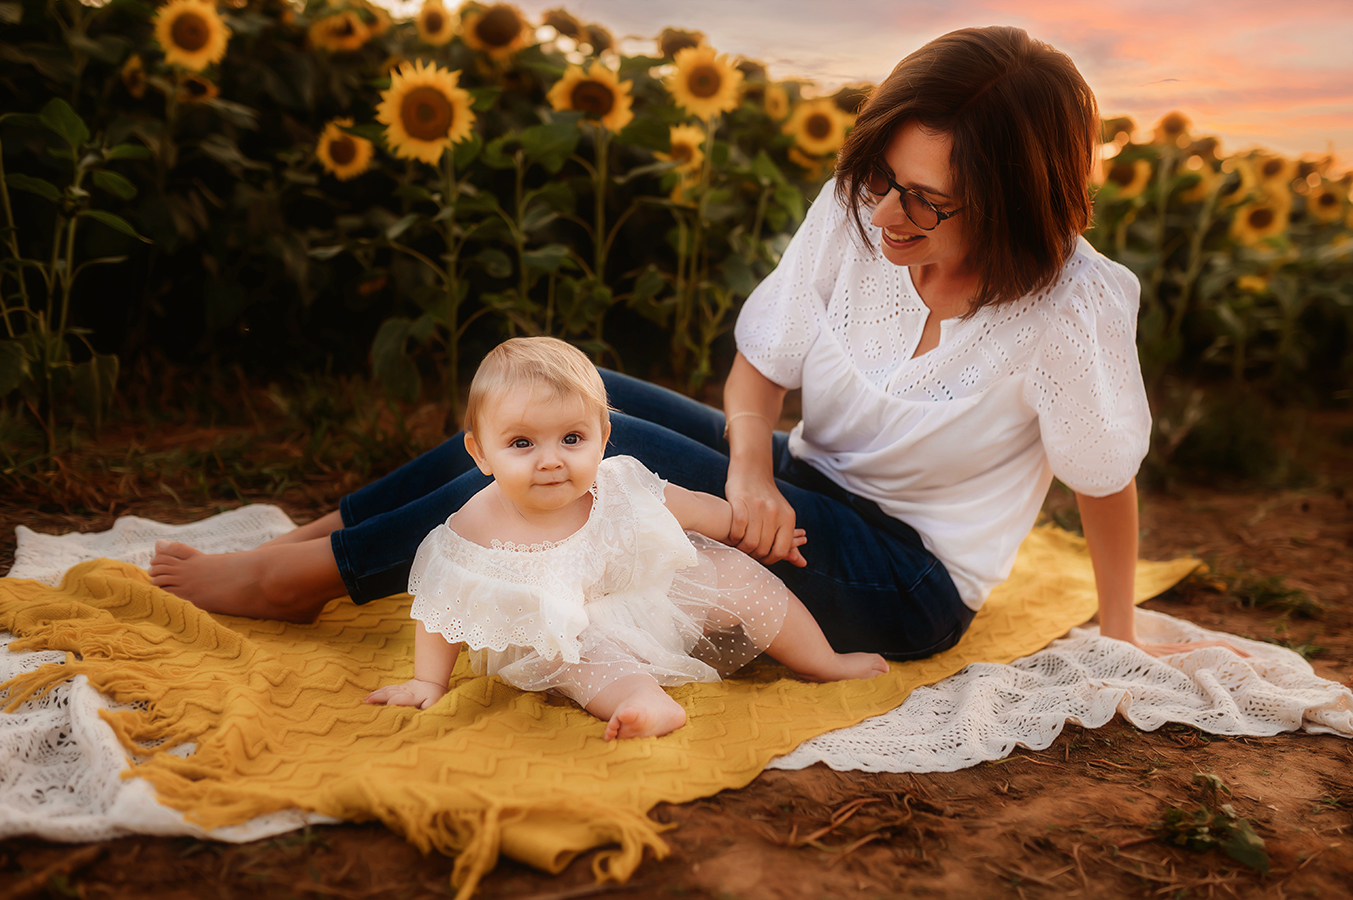 Mother poses with her baby in a Sunflower Field for a Family Photoshoot in Asheville, NC.